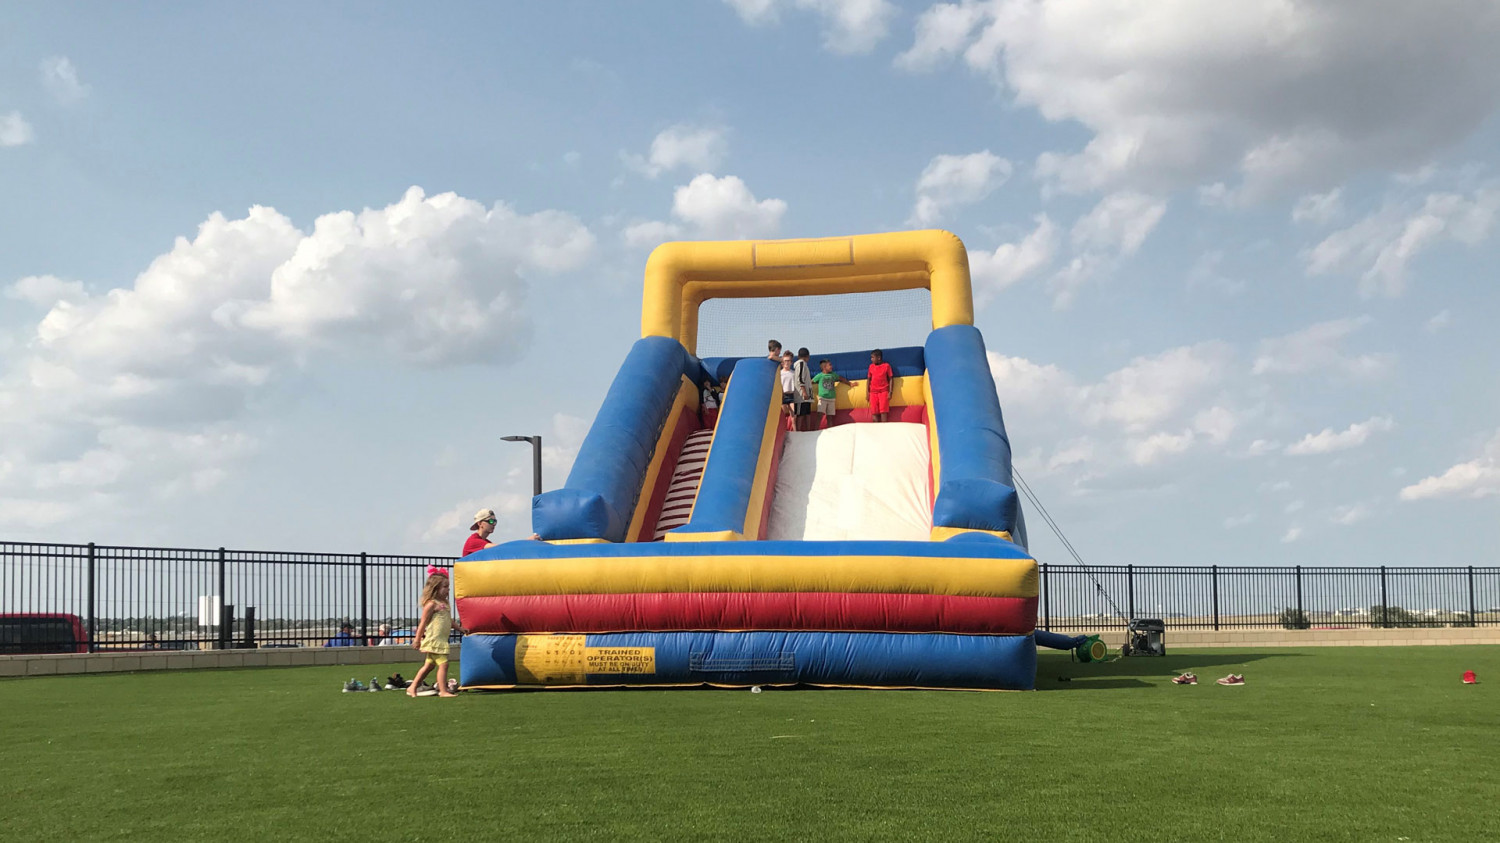 T'S Extreme Inflatables